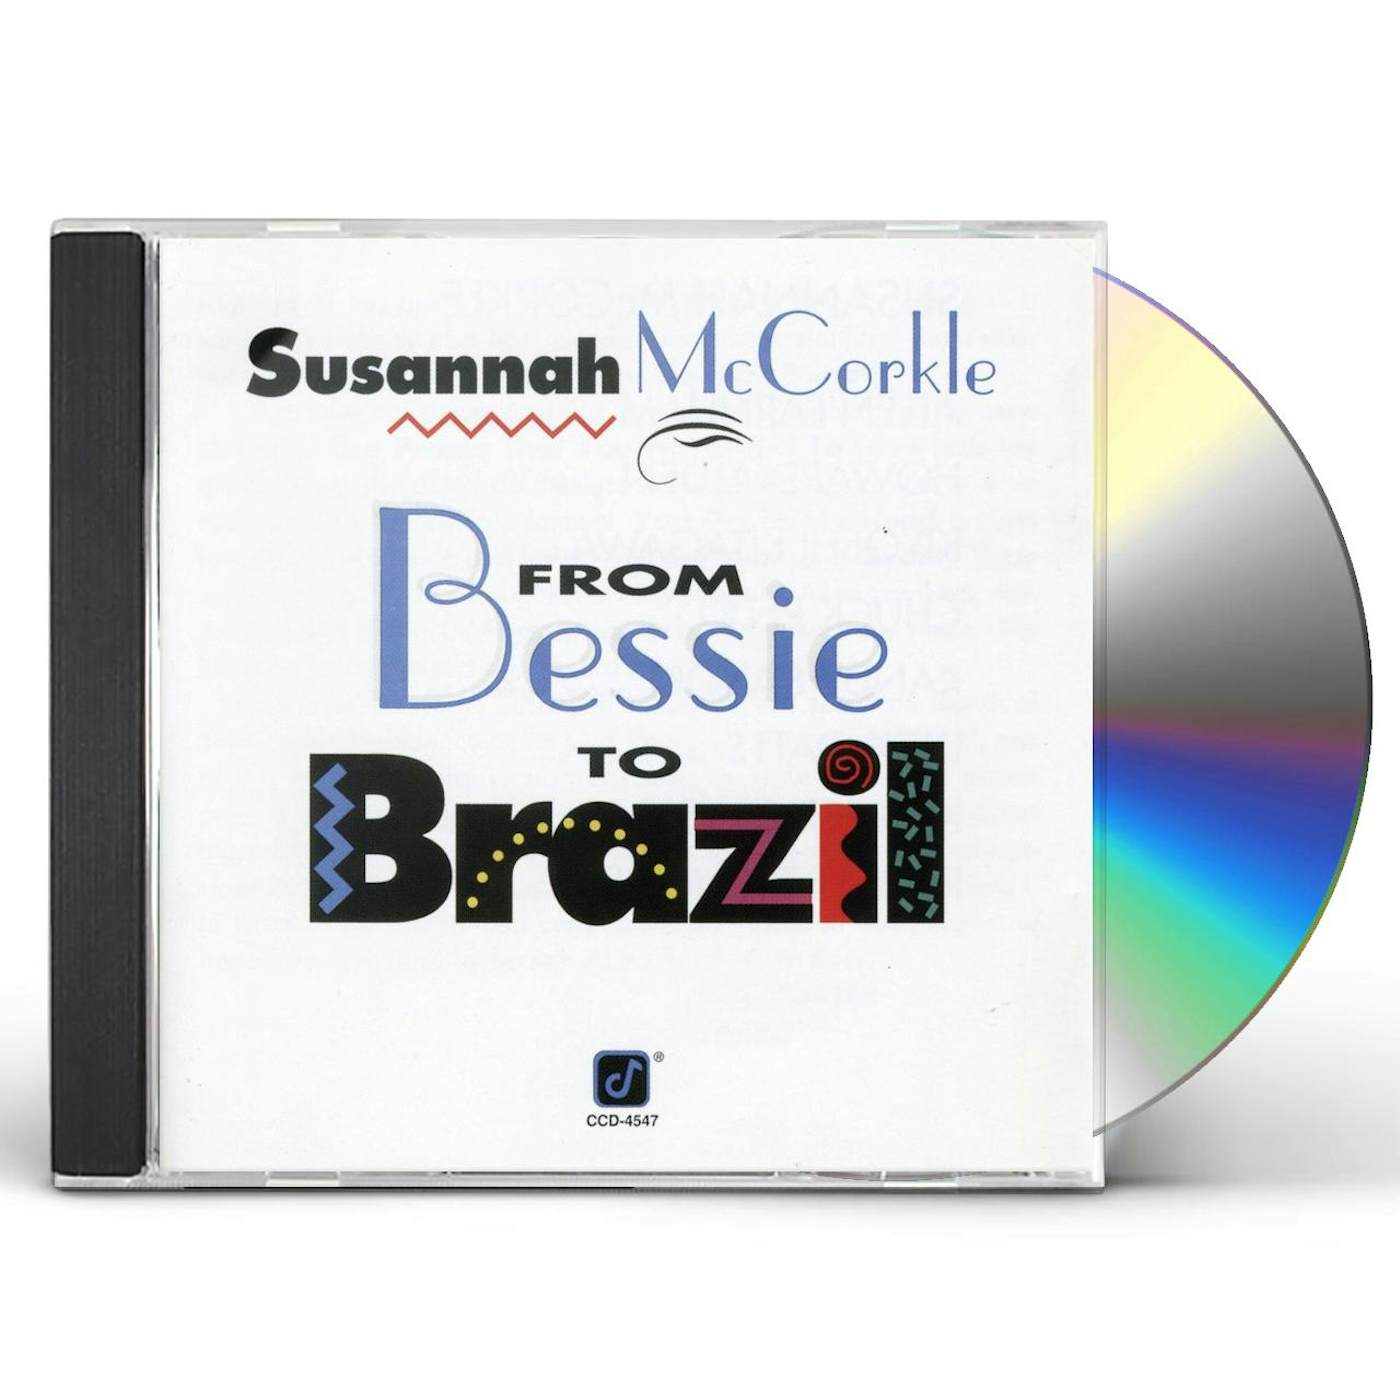 Susannah McCorkle FROM BESSIE TO BRAZIL CD